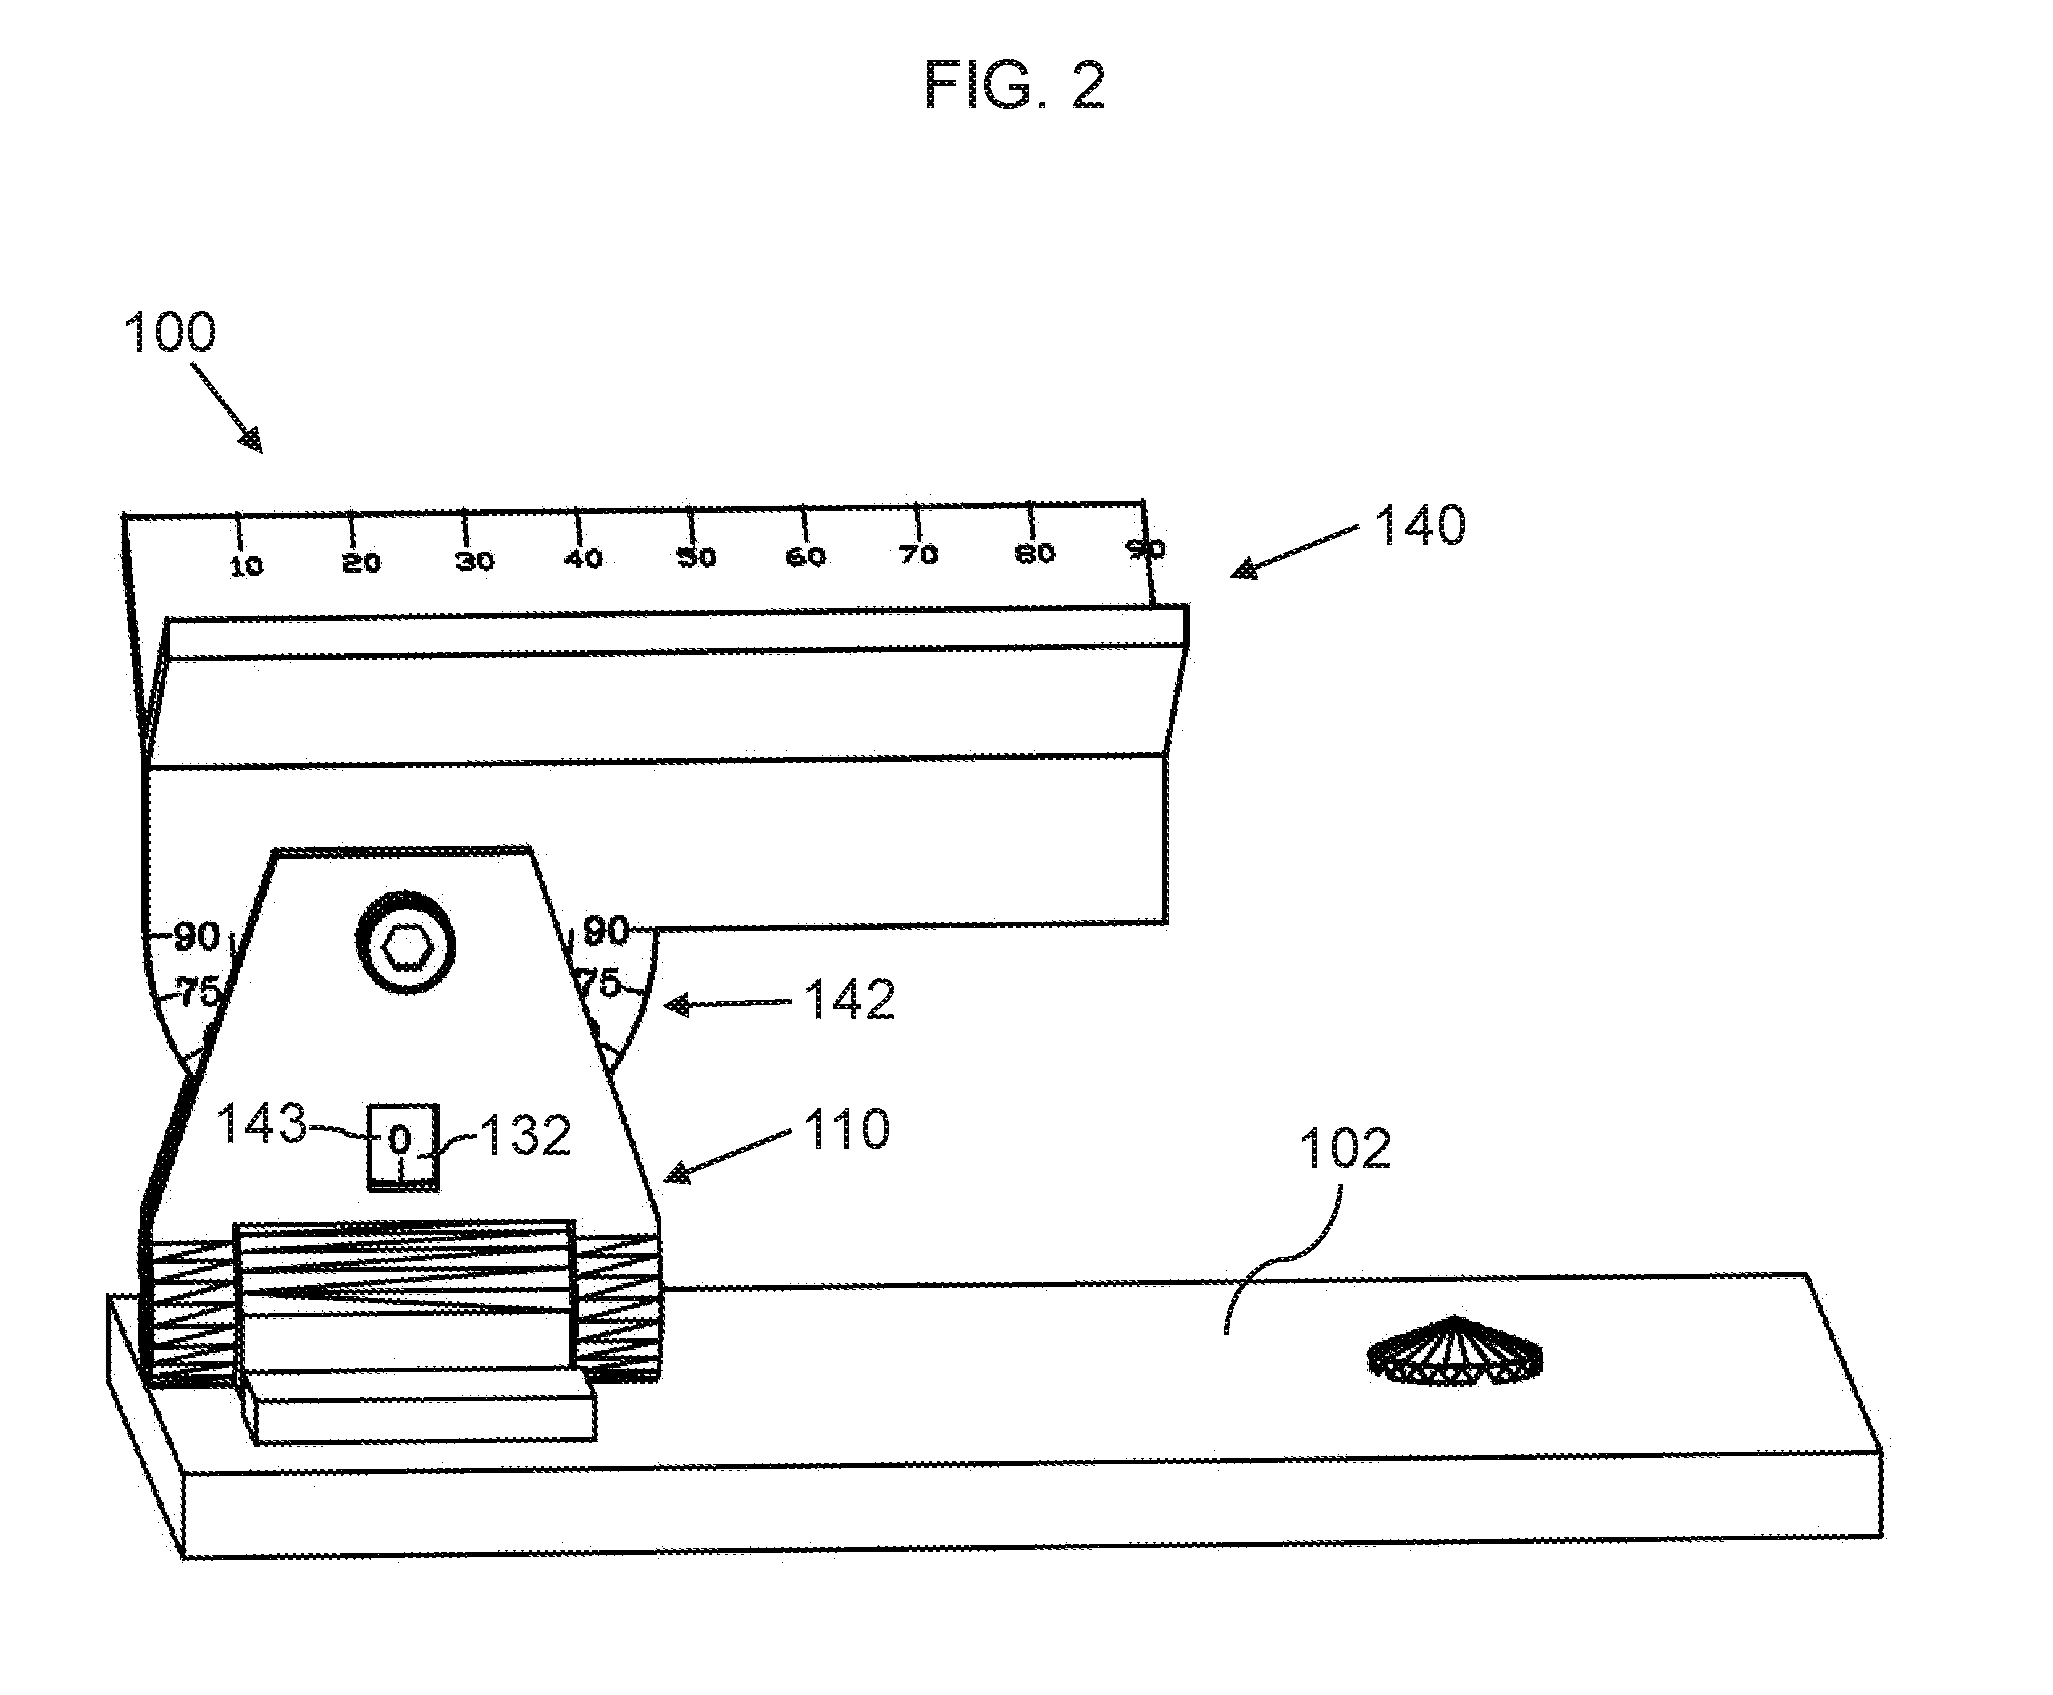 Angle-guidance device and method for CT guided drainage and biopsy procedures